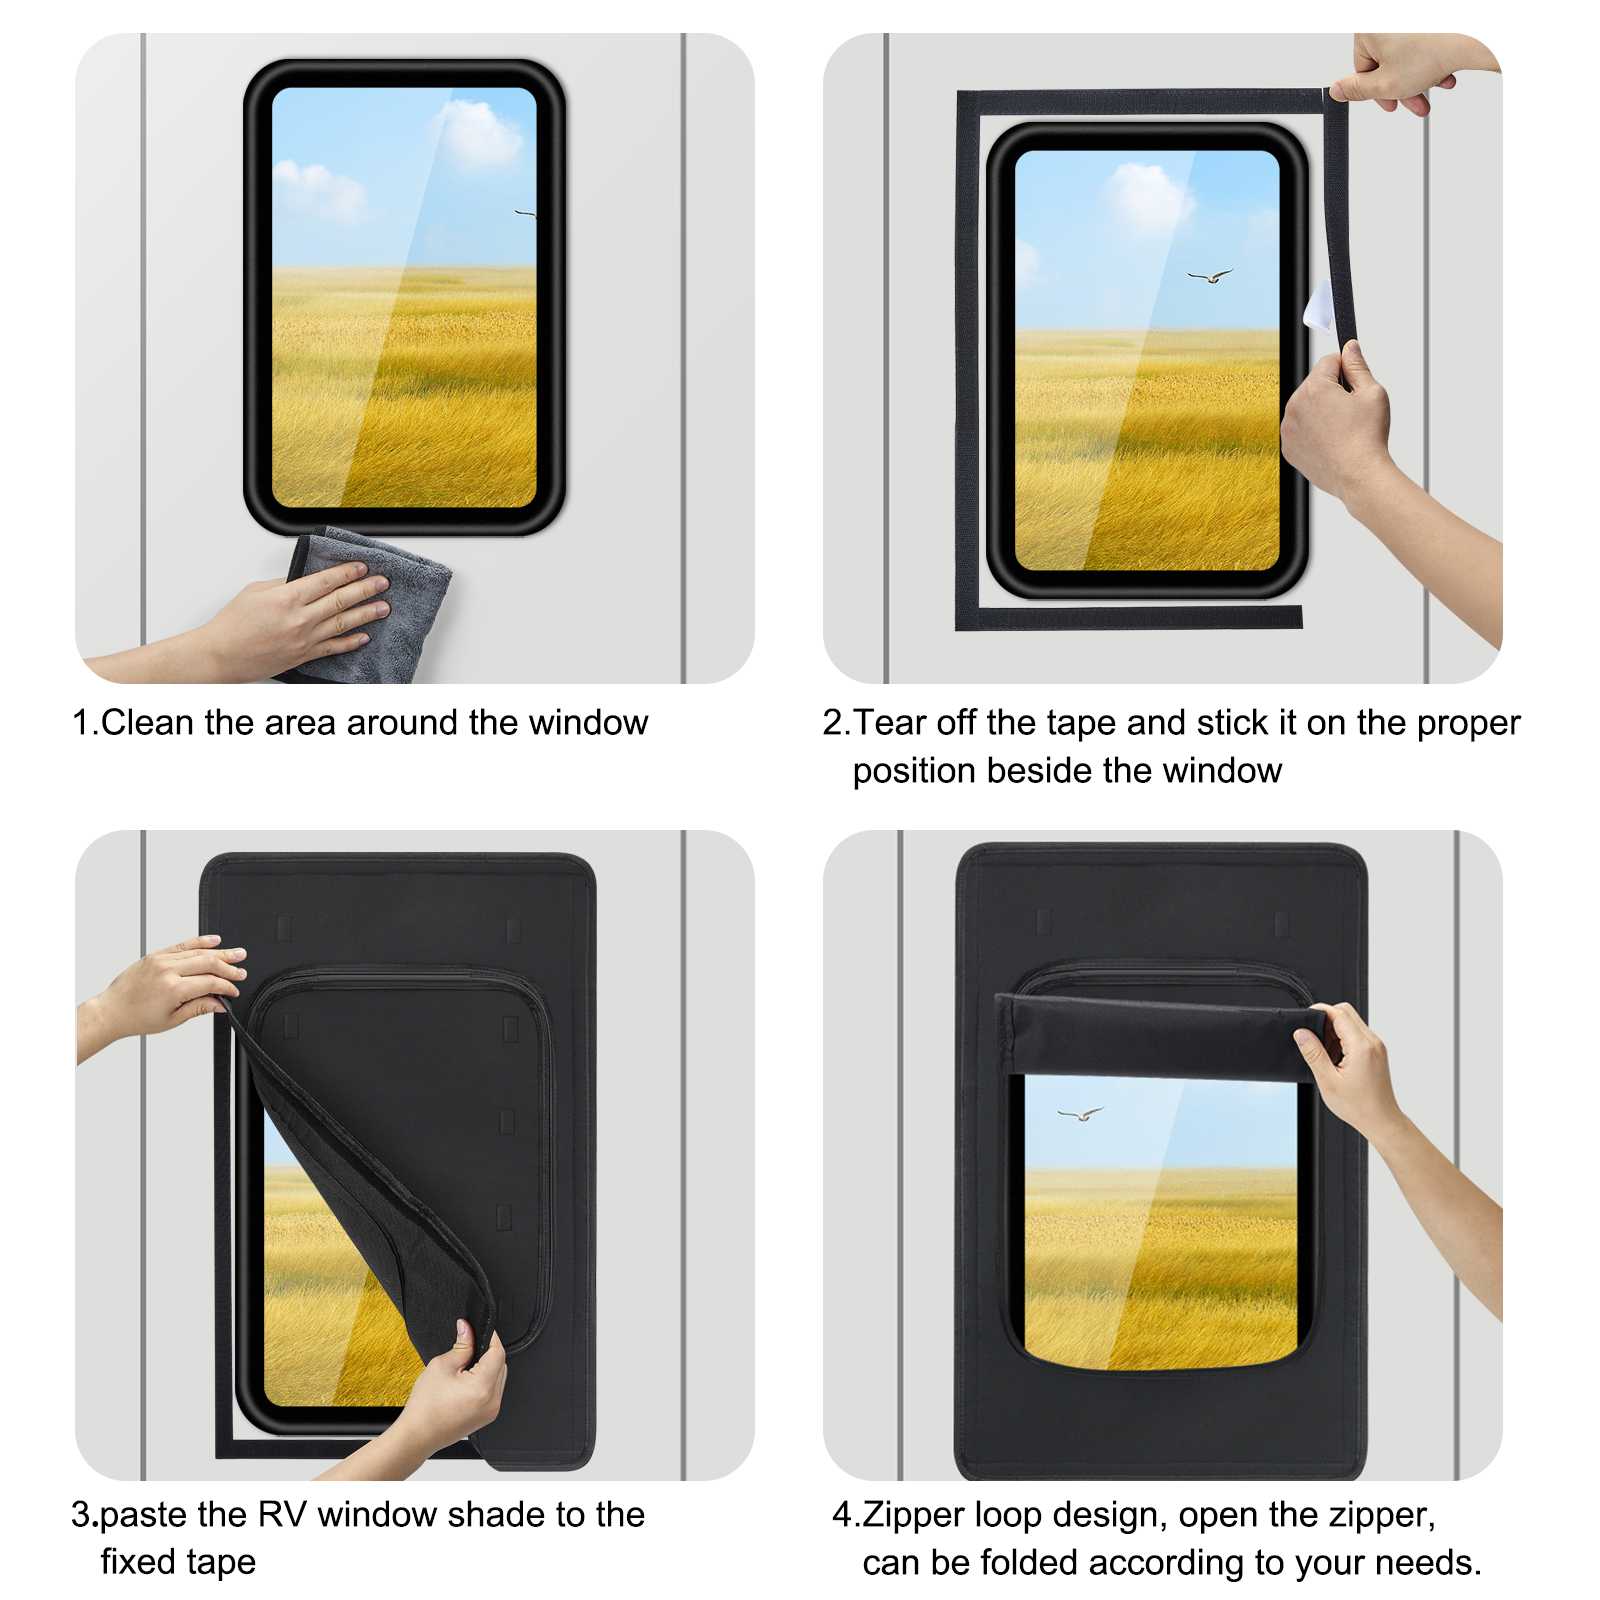  RV Door Window Shade Cover, Sun Blackout Fabric for Camper  Privacy Entrance (16 x 25 inch) : Automotive